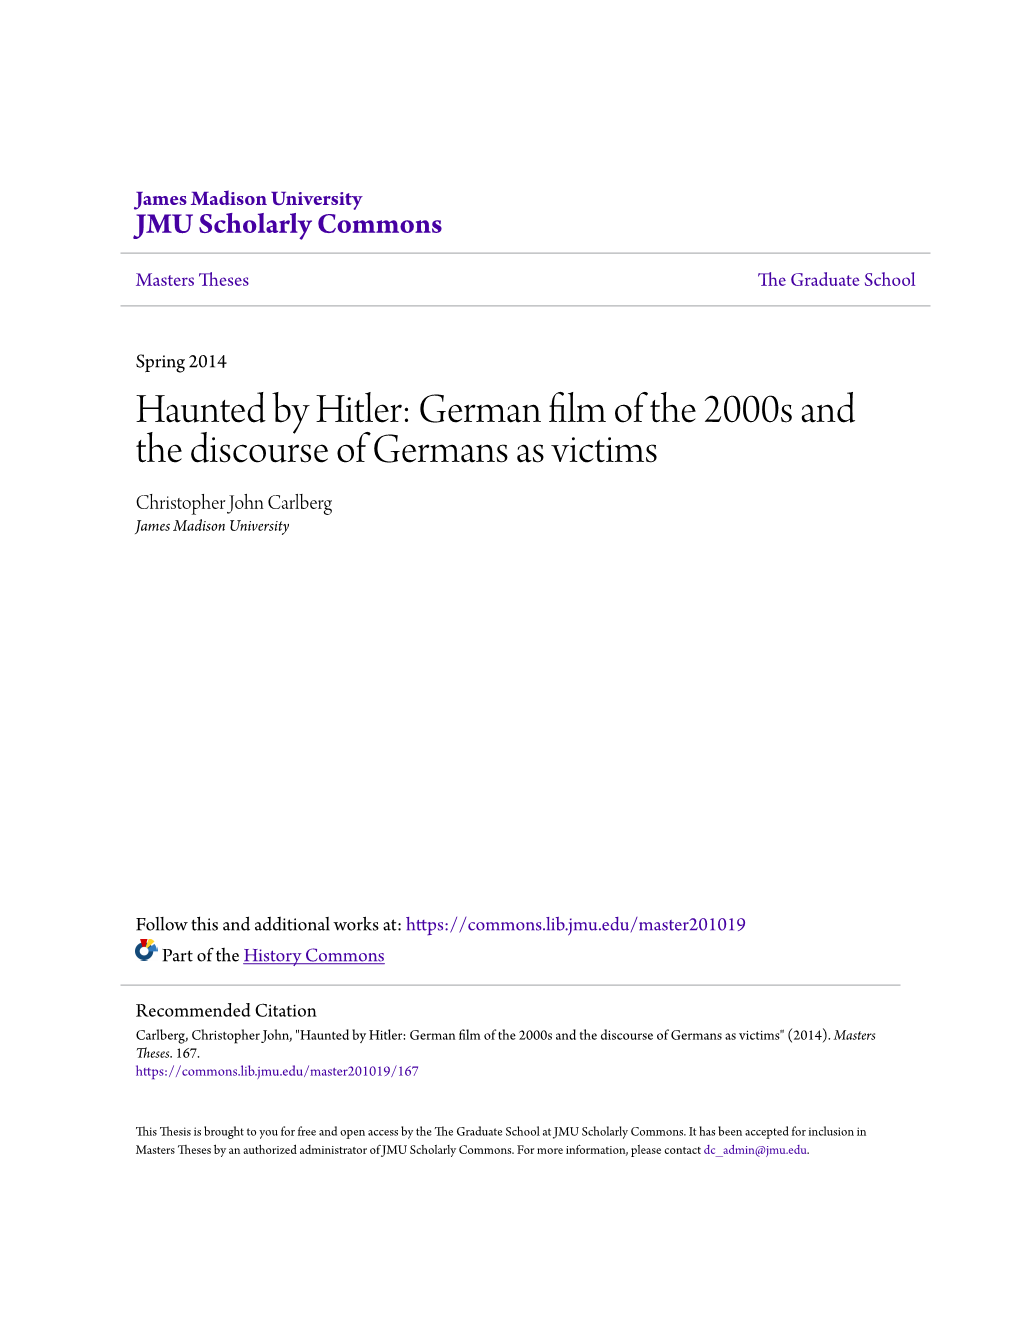 Haunted by Hitler: German Film of the 2000S and the Discourse of Germans As Victims Christopher John Carlberg James Madison University